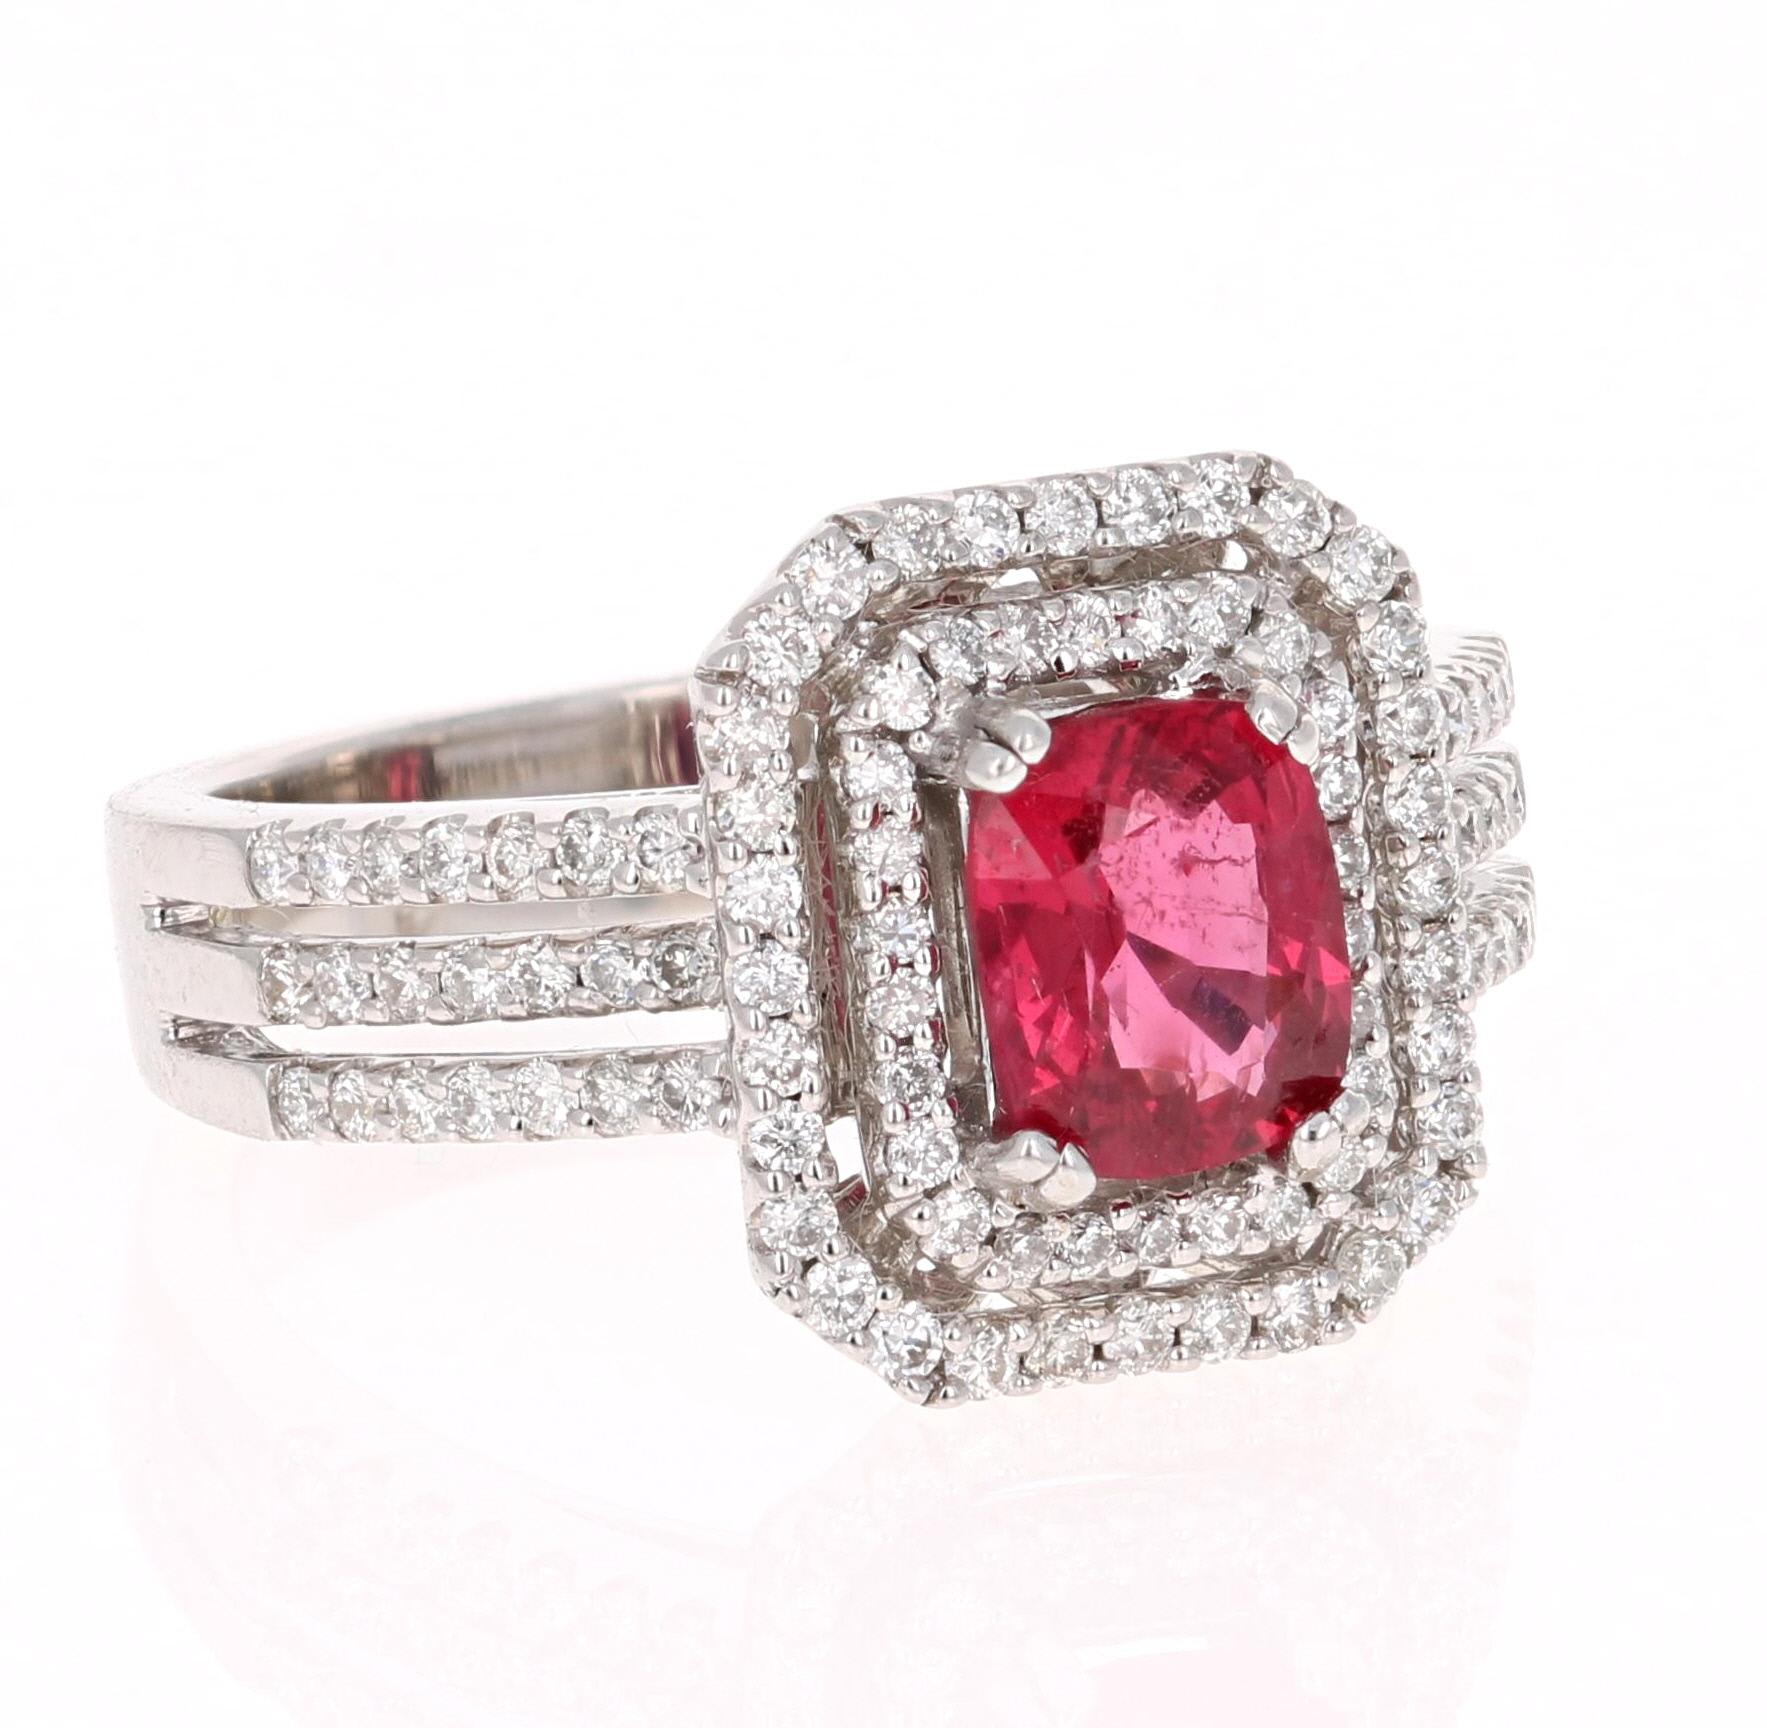 Gorgeous Gorgeous Gorgeous! 

The Spinel is natural and weighs 1.09 Carats. It has 100 Round Cut Diamonds set in a Double Halo weighing 0.70 Carats. The clarity and color of the diamonds are SI2-F The total carat weight is 1.79 Carats.

It is set in